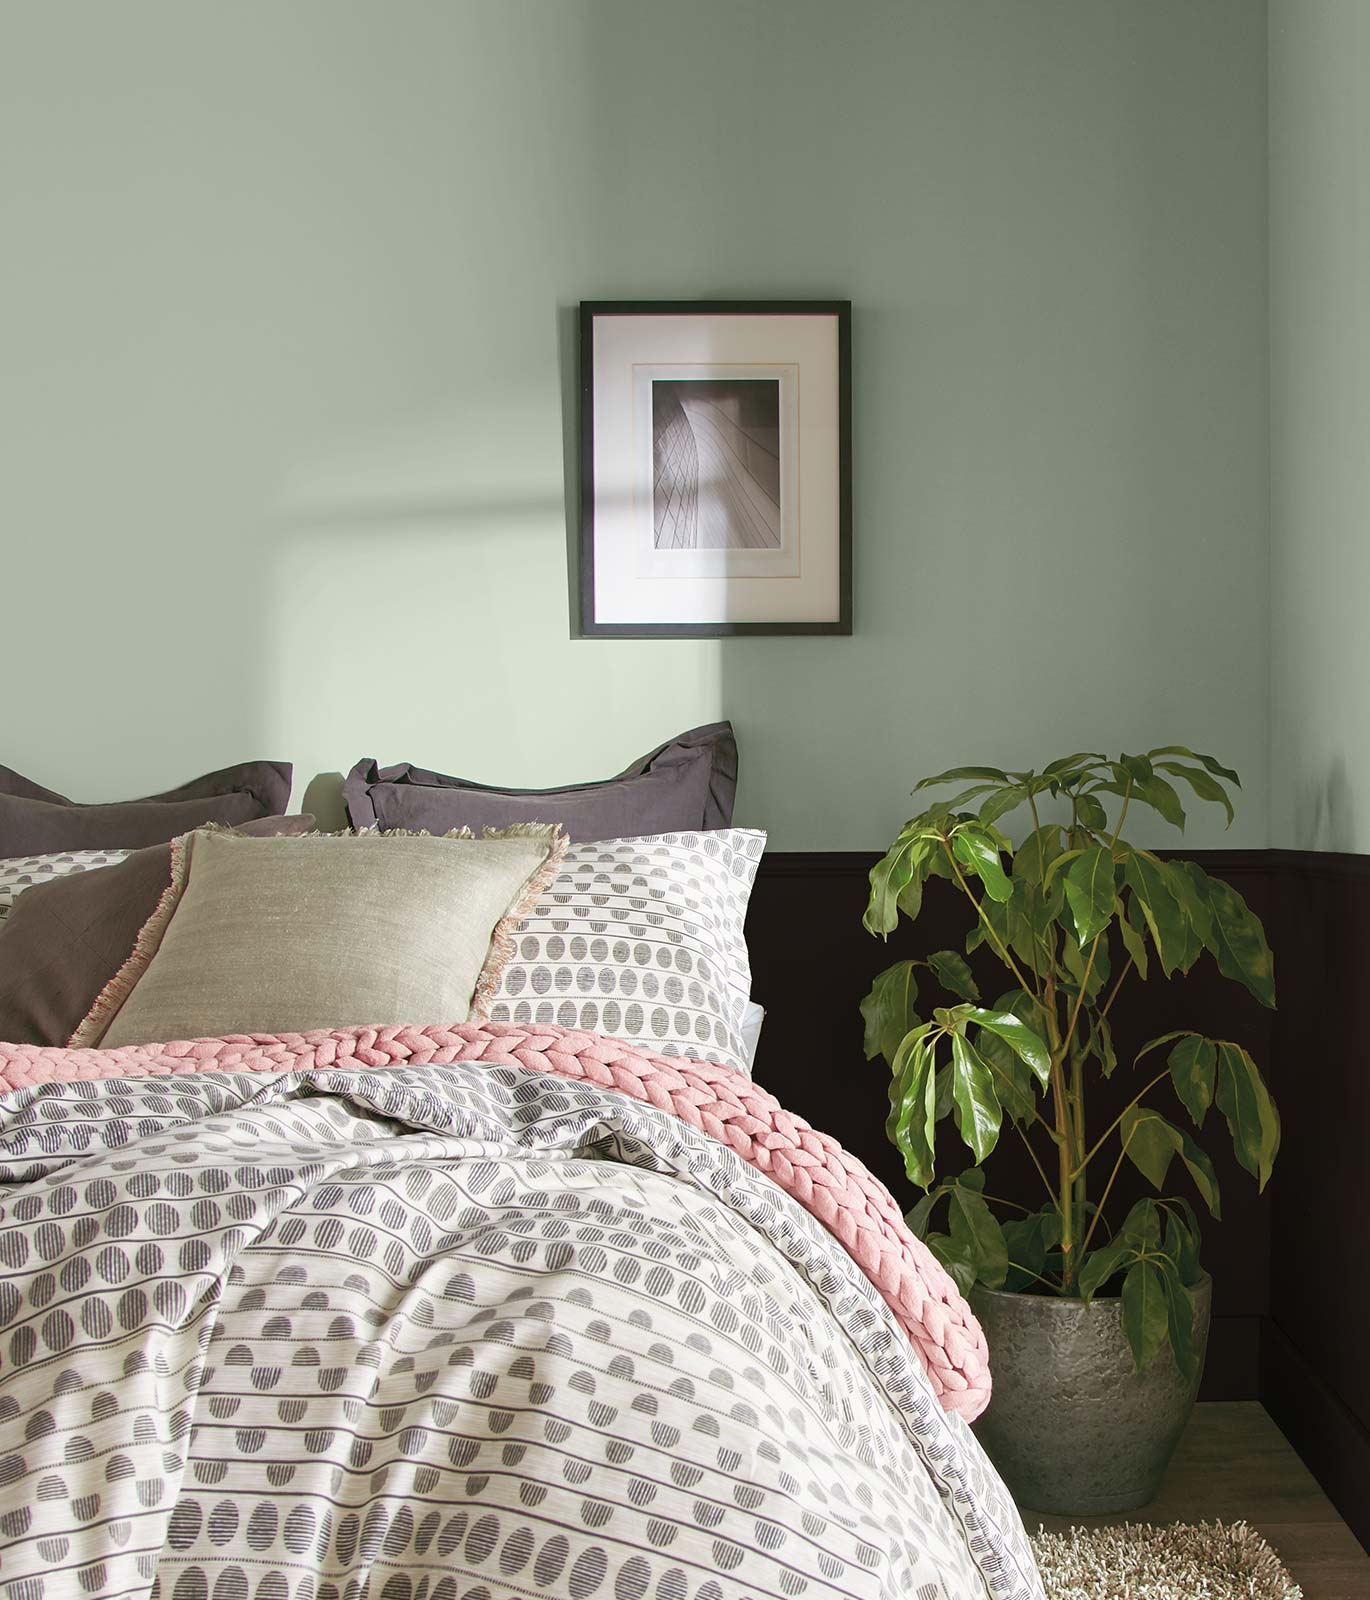 Tight crop of a bedroom with gray and white bedding. Upper half of the walls are painted in a light green. The bottom half is painted black. The feel of the room is calming.